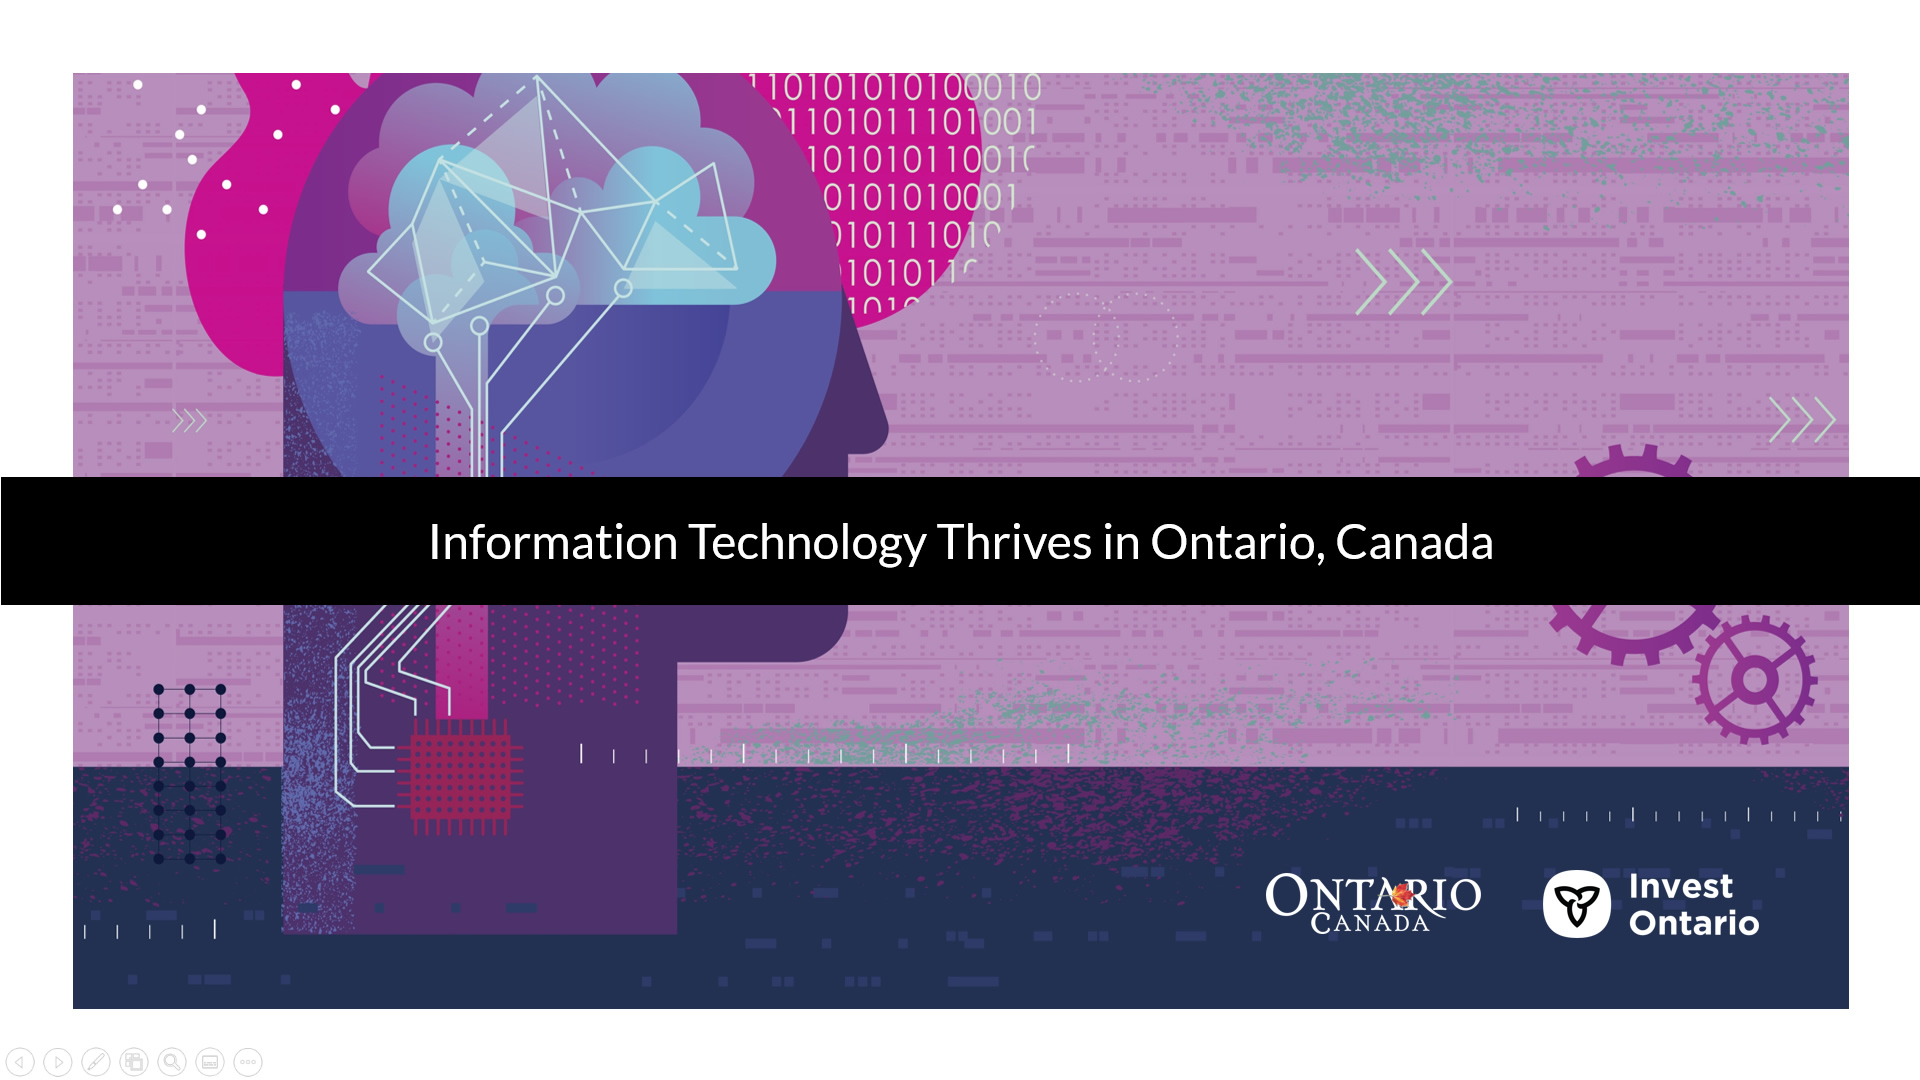 Thumbnail image for Information Technology Thrives in Ontario, Canada PowerPoint